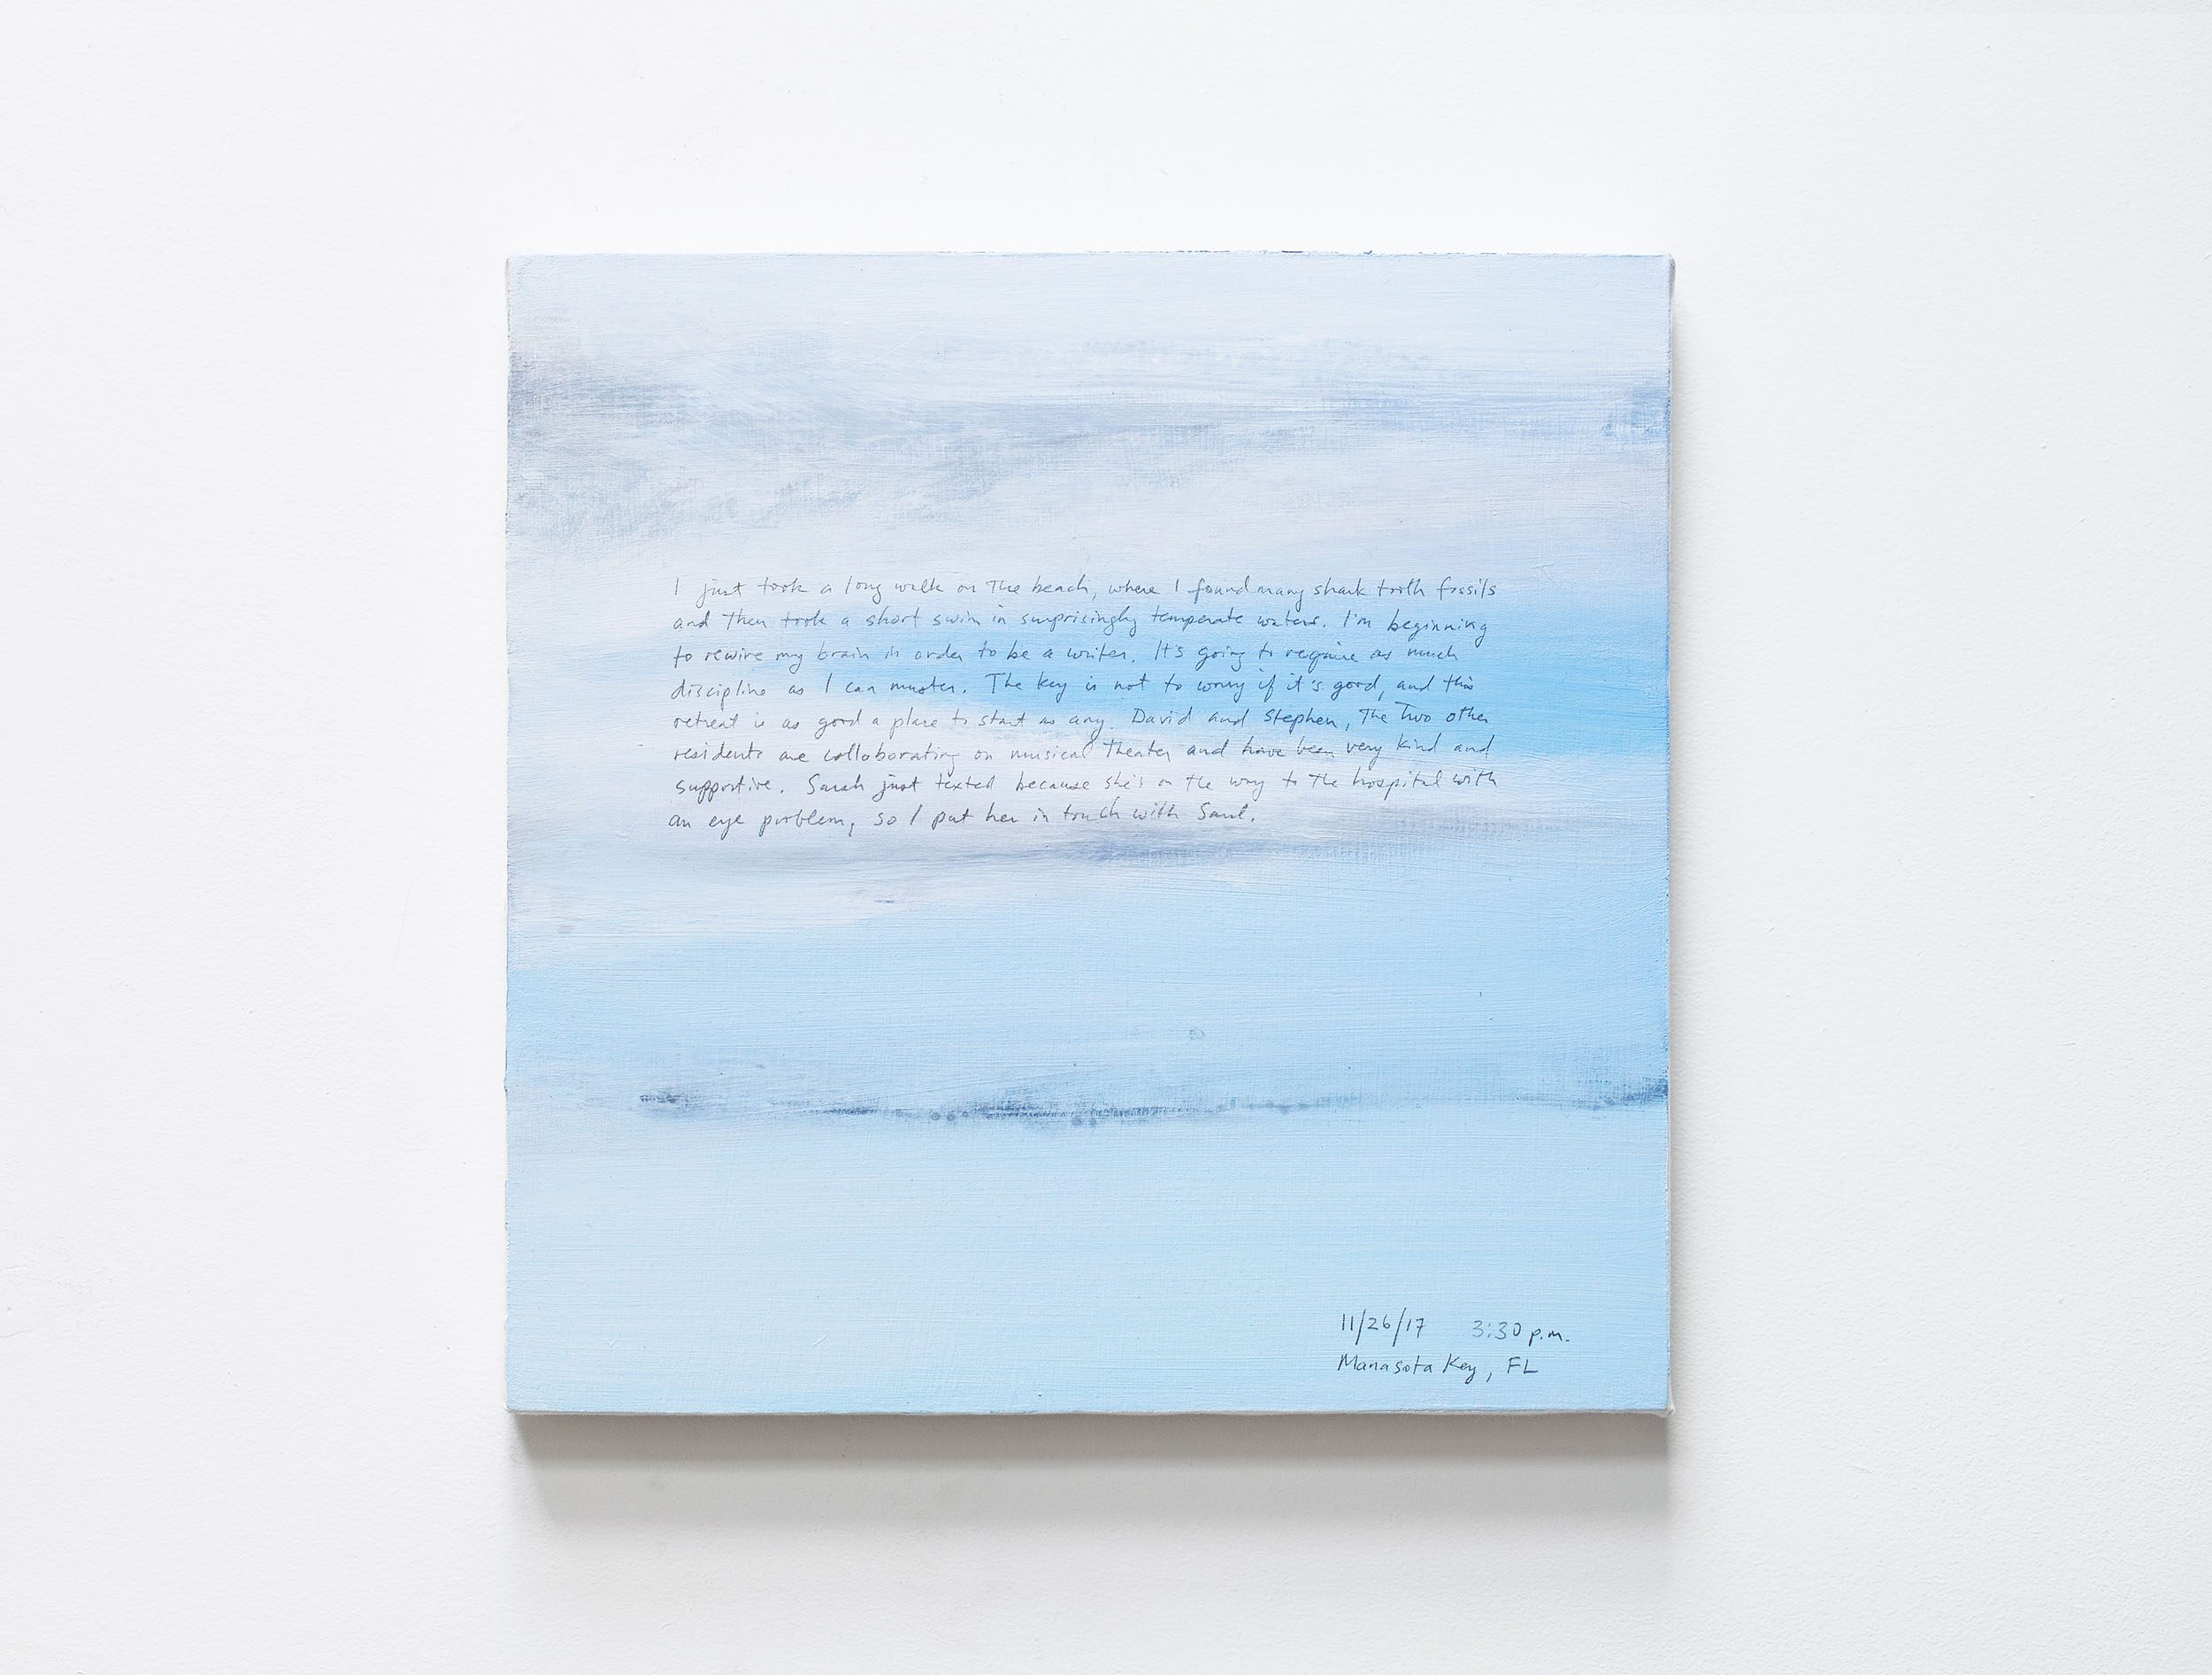 A 14 × 14 inch, acrylic painting of the sky. A journal entry is handwritten on the painting:

“I just took a long walk on the beach, where I found many shark tooth fossils and then took a short swim in surprisingly temperate waters. I’m beginning to rewire my brain in order to be a writer. It’s going to require as much discipline as I can muster. The key is not to worry if it’s good and this retreat is as good a place to start as any. David and Stephen, the two other residents, are collaborating on musical theater and have been very kind and supportive. Sarah just texted because she’s on the way to the hospital with an eye problem, so I put her in touch with Saul. 

11/26/17 3:30 pm
Manasota Key, FL”